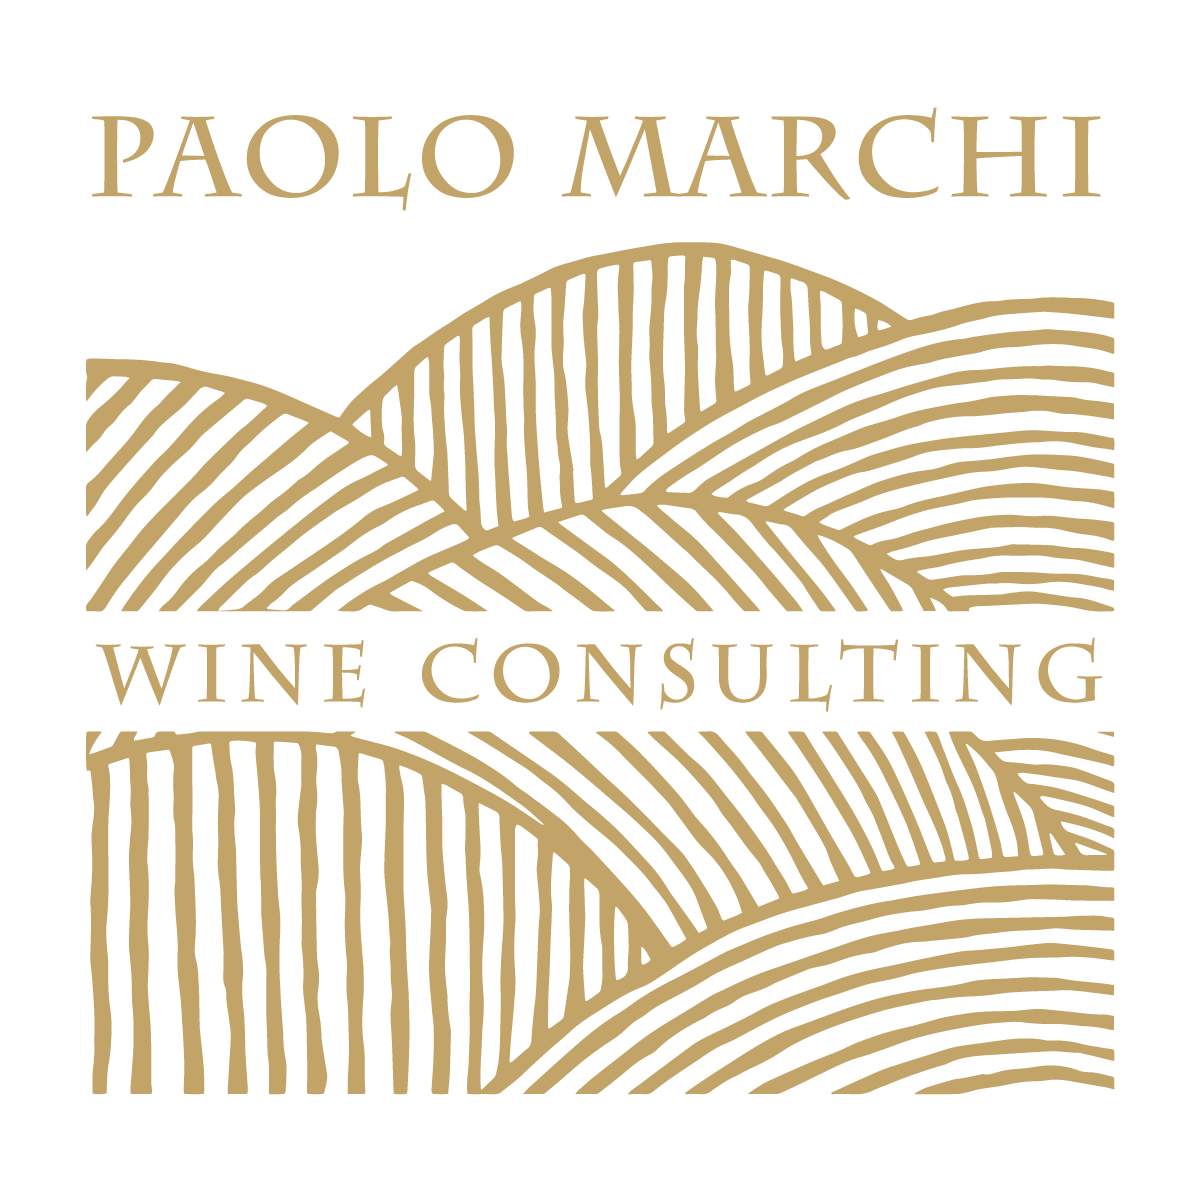 Paolo Marchi Wine Consulting